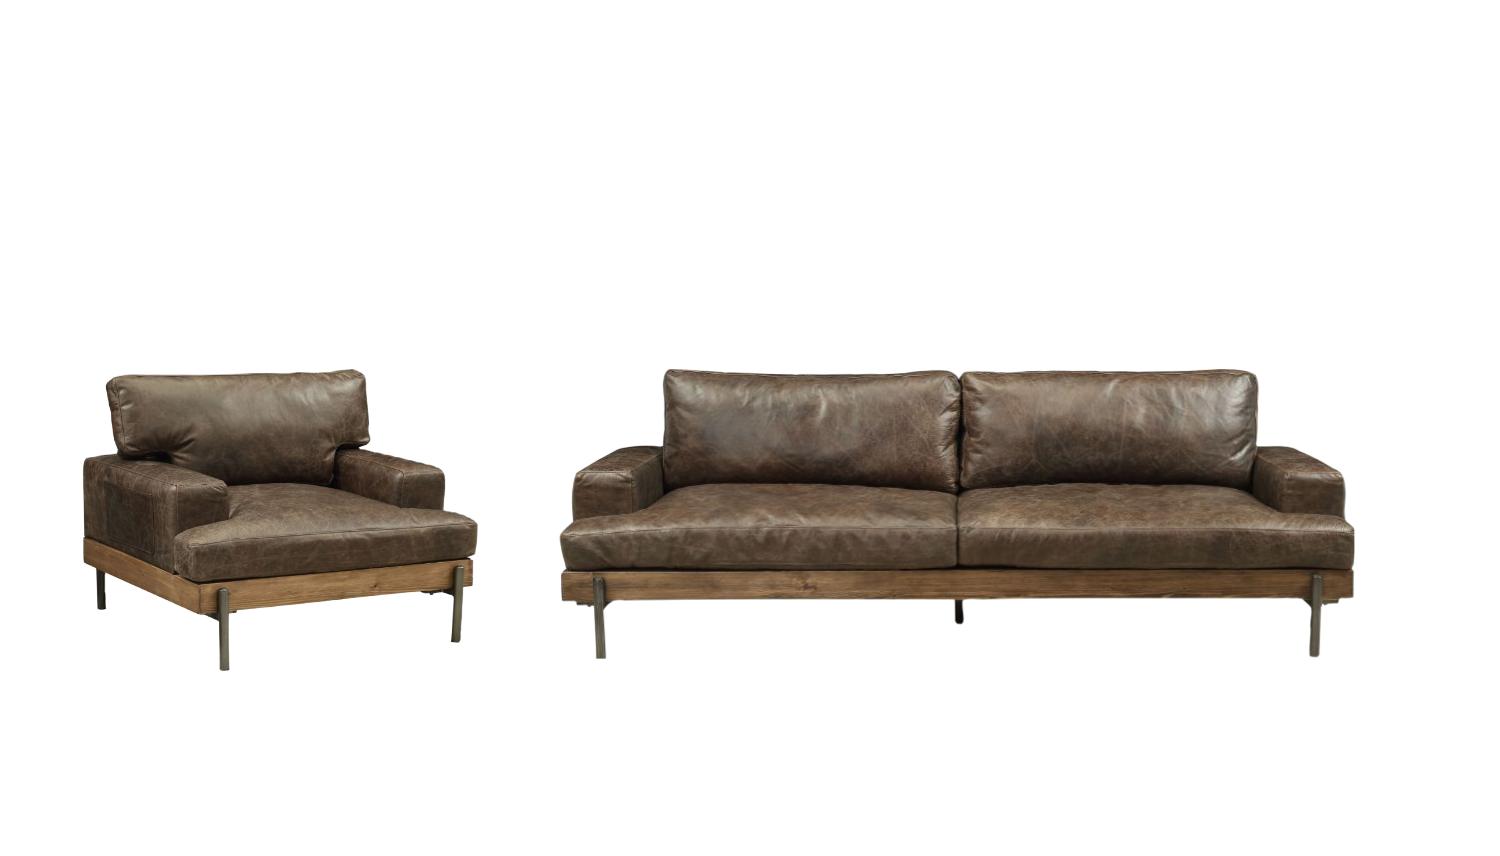 Acme Furniture Silchester Sofa and Chair